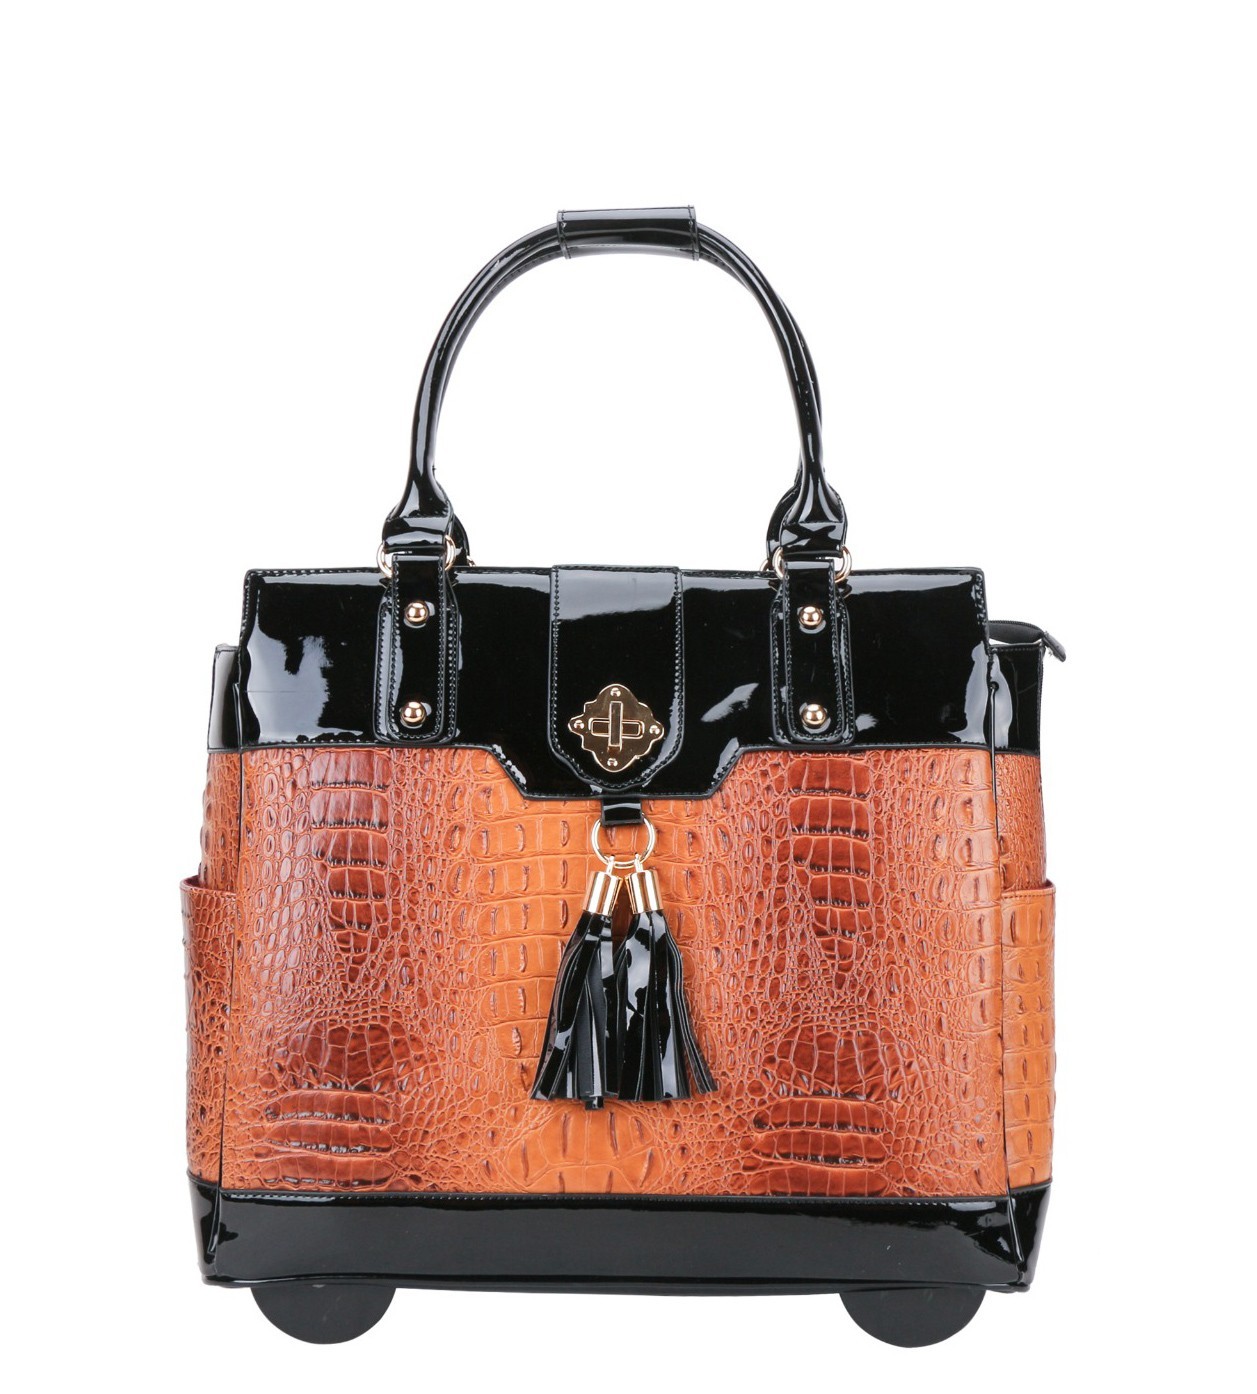 Khatoco's crocodile and ostrich leather handbags are mesmerizing